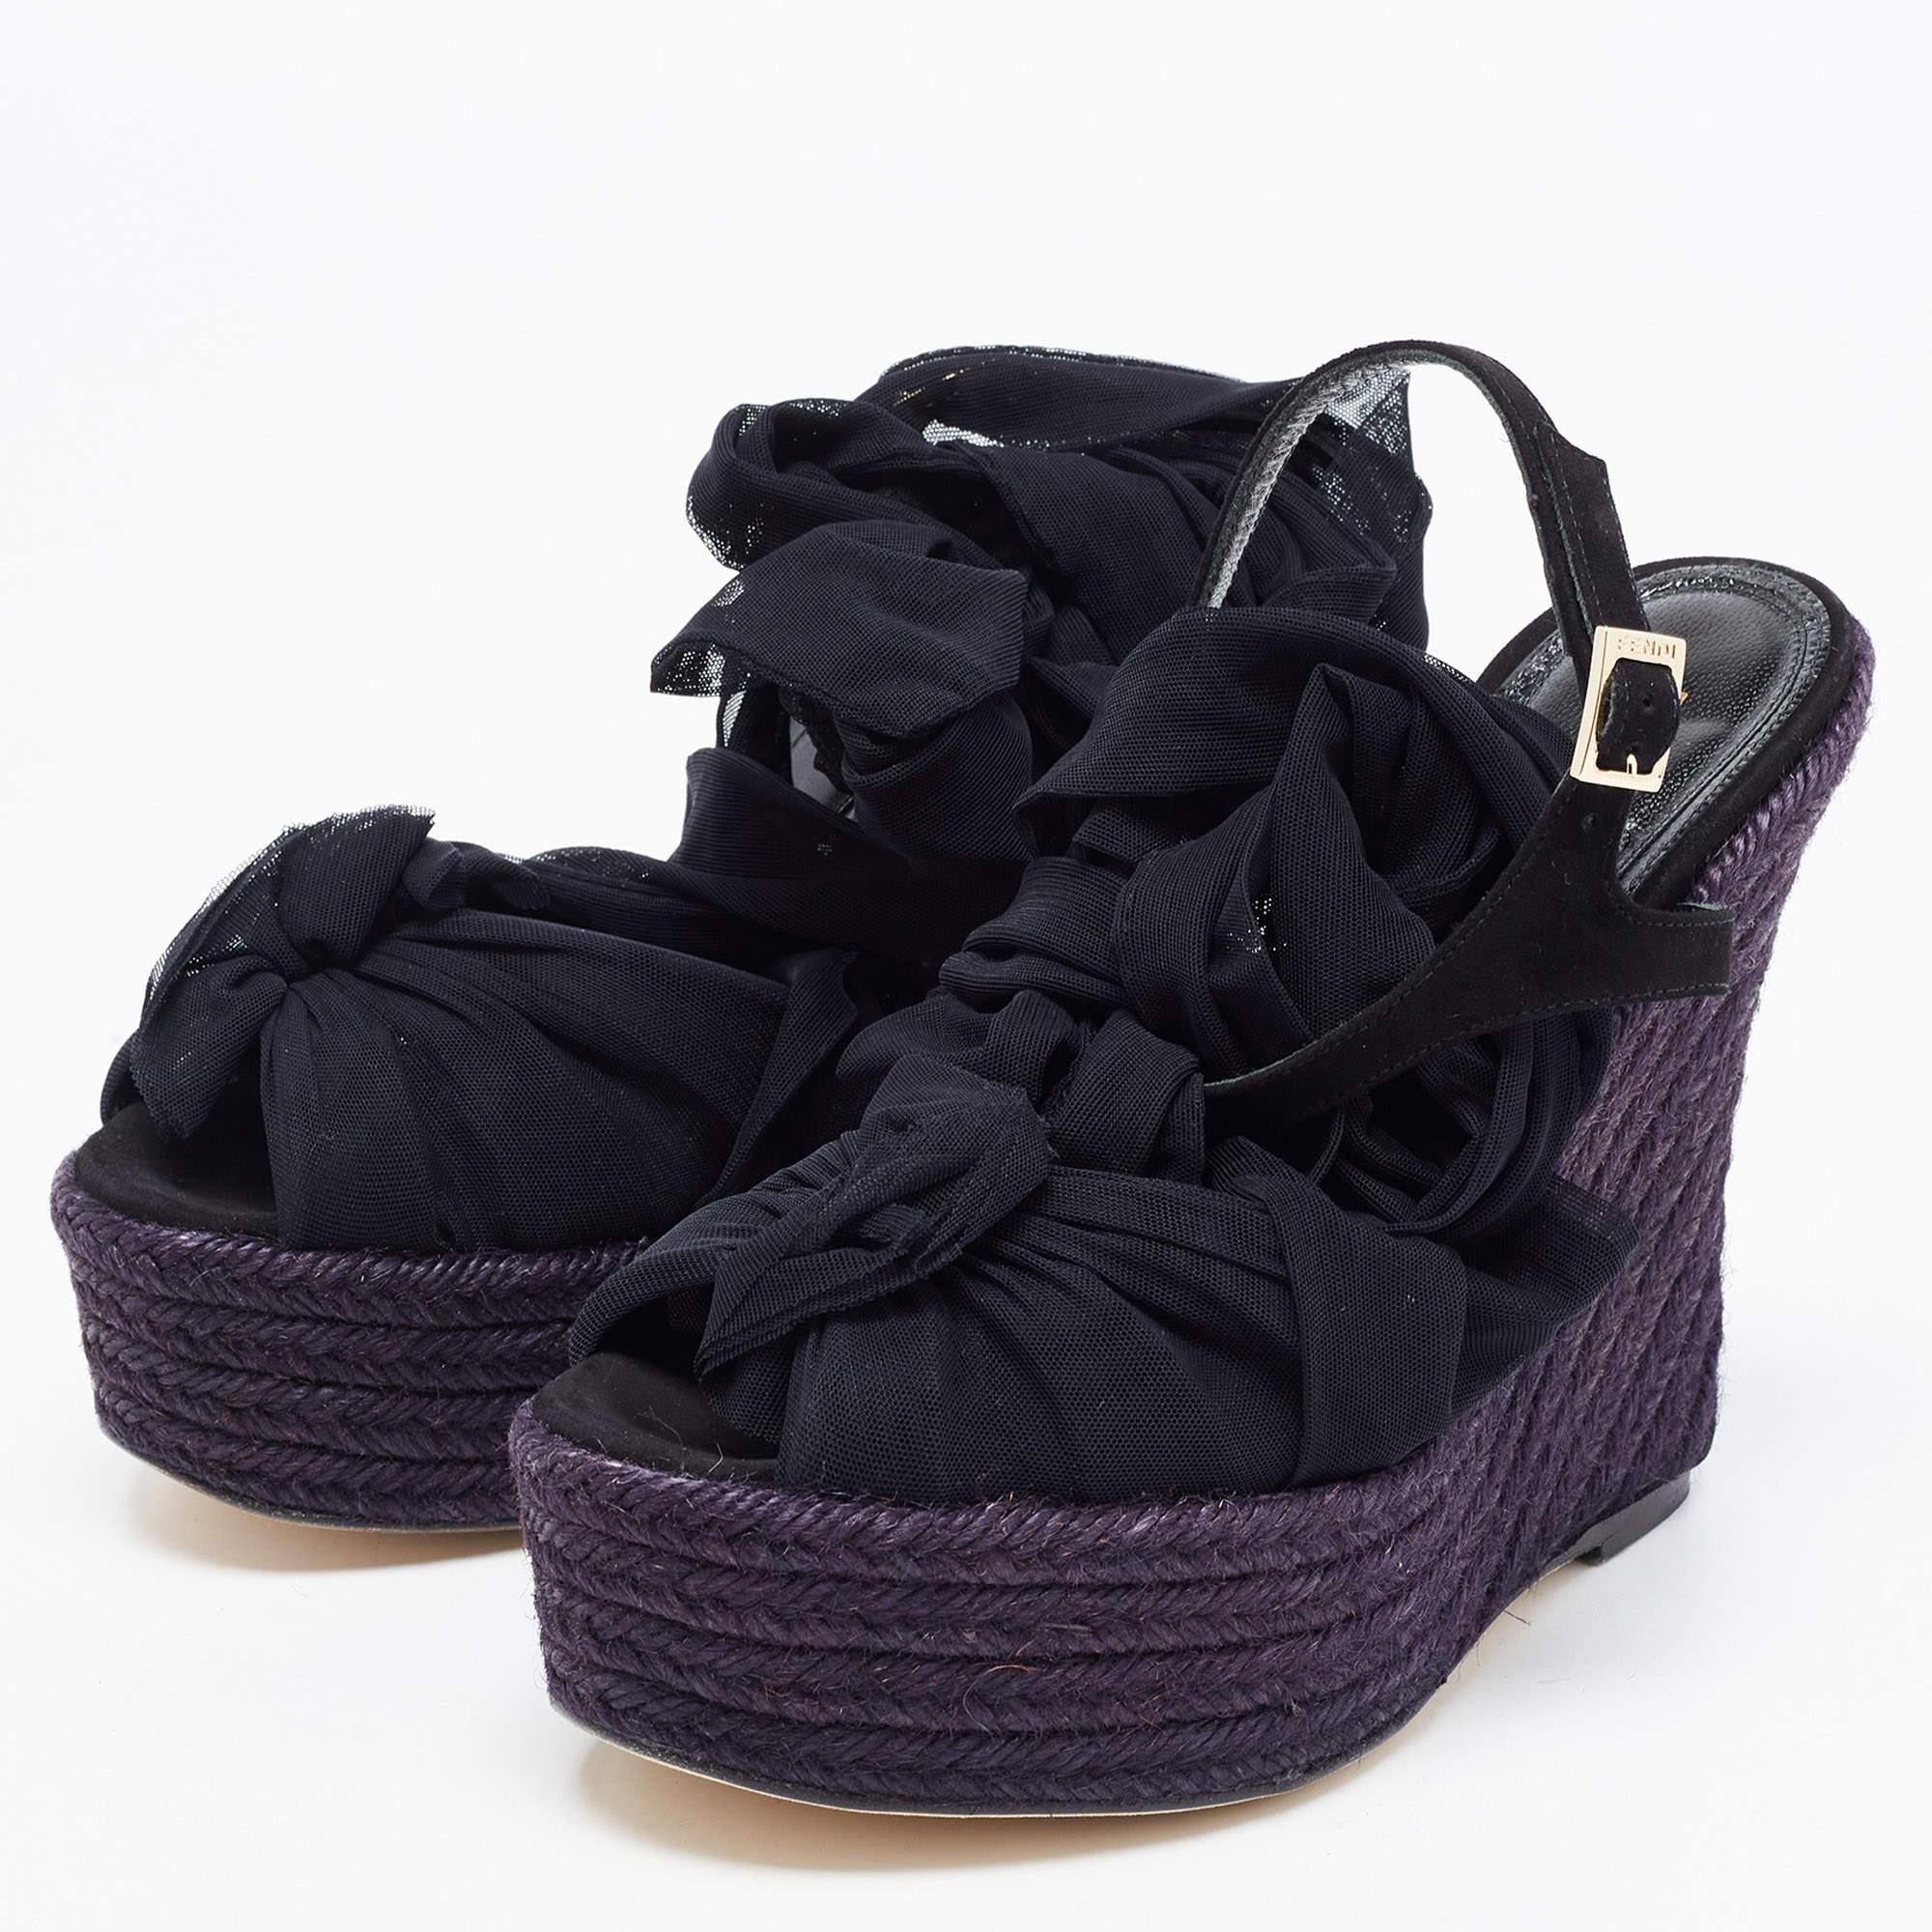 Whether you're into high style, comfort, or both, these lovely wedges will never disappoint. They feature a chic silhouette and an eye-pleasing hue. Make this pair yours today!

Includes: Original Box